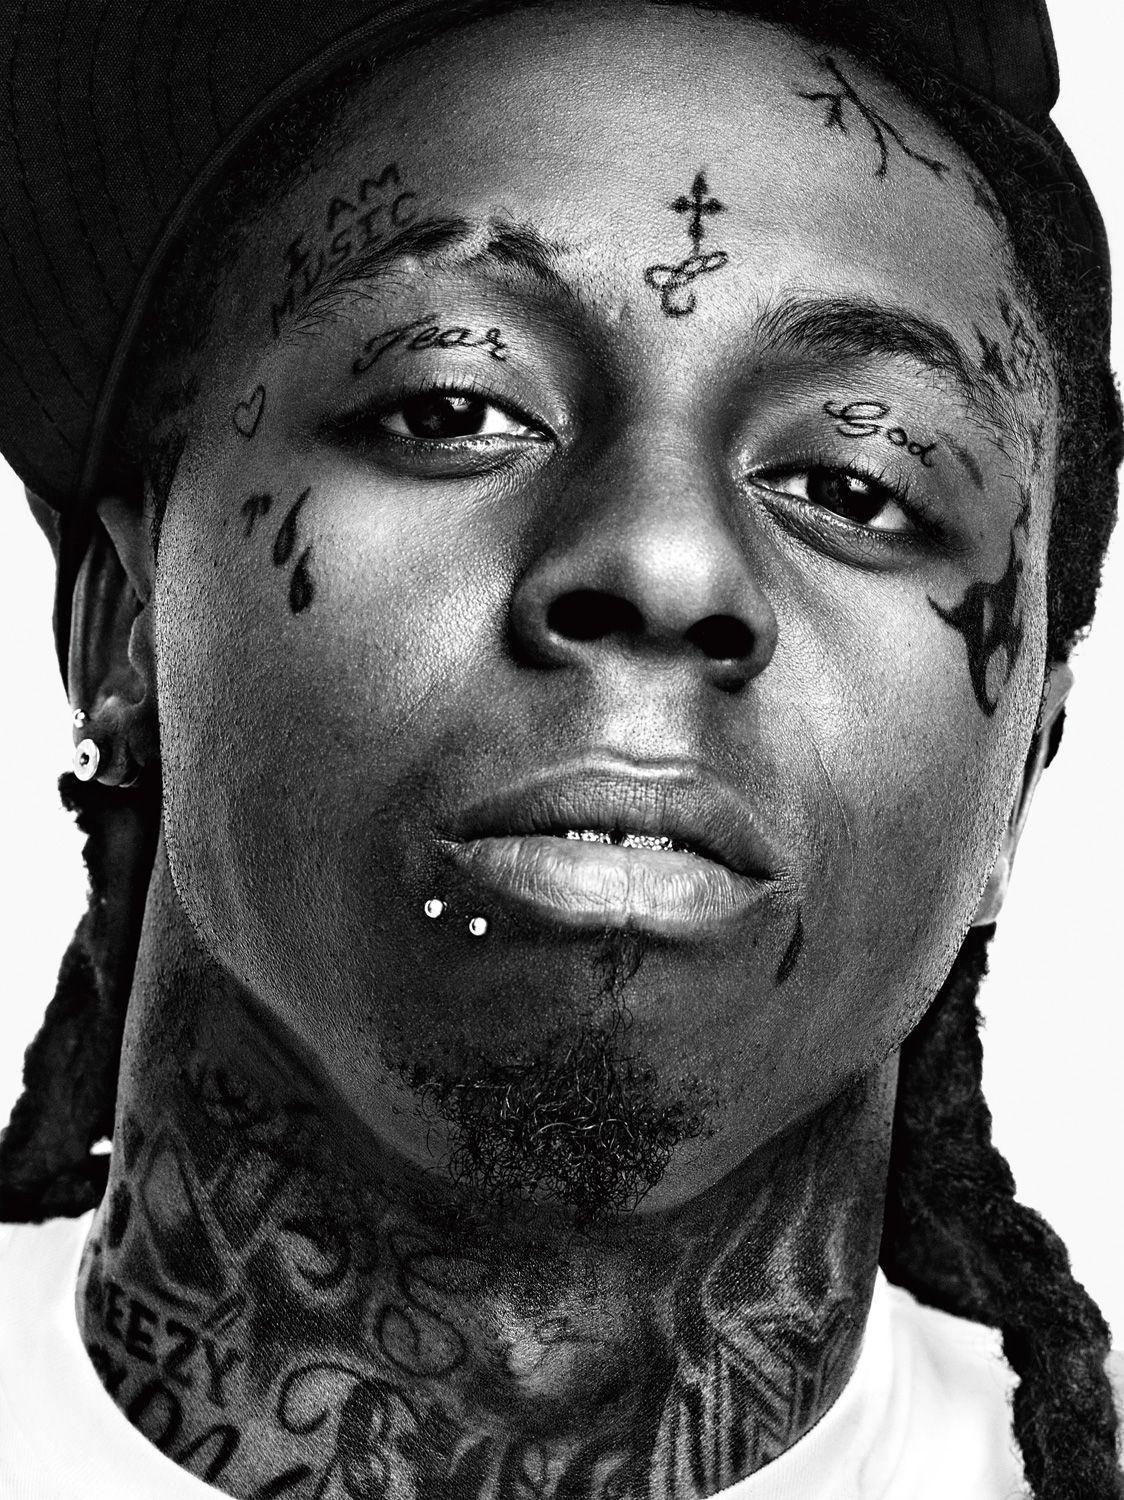 Official Post Rare Picture of Lil Wayne Thread [Archive]